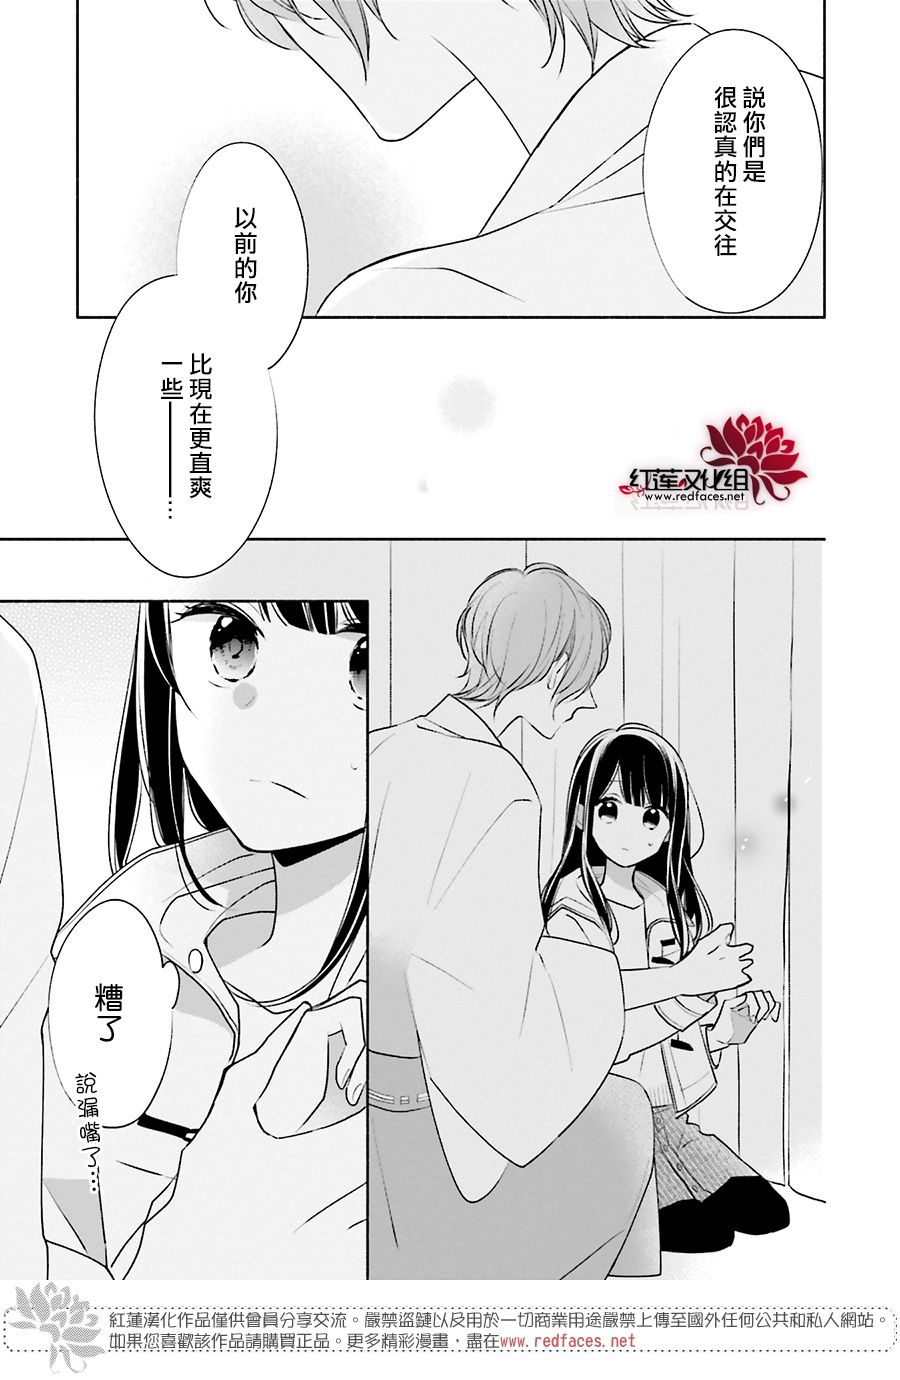 If given a second chance - 24話 - 1